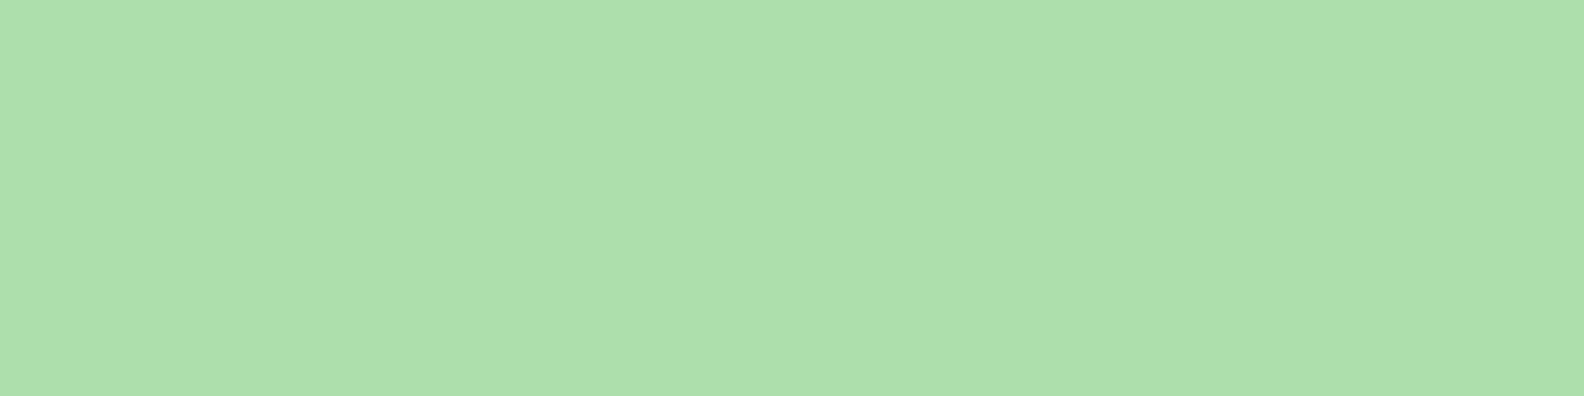 1584x396 Light Moss Green Solid Color Background